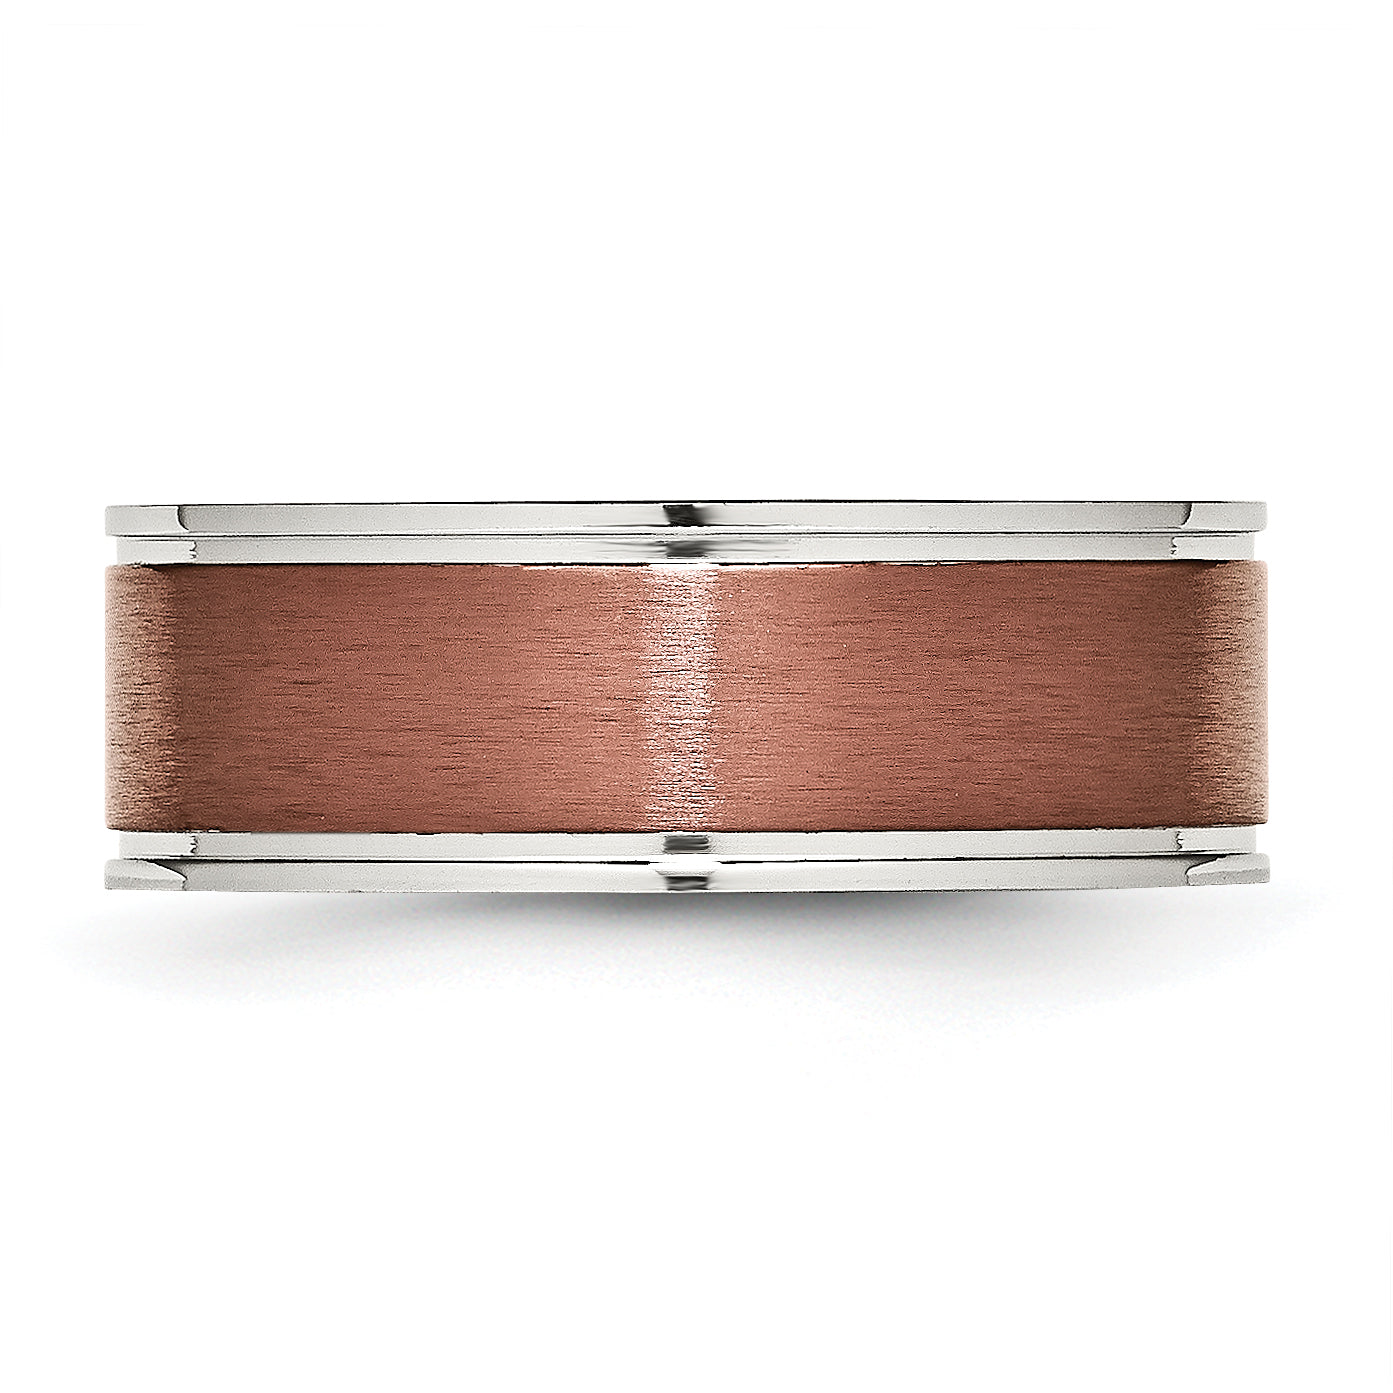 Stainless Steel Brushed and Polished Brown IP-plated 8mm Band